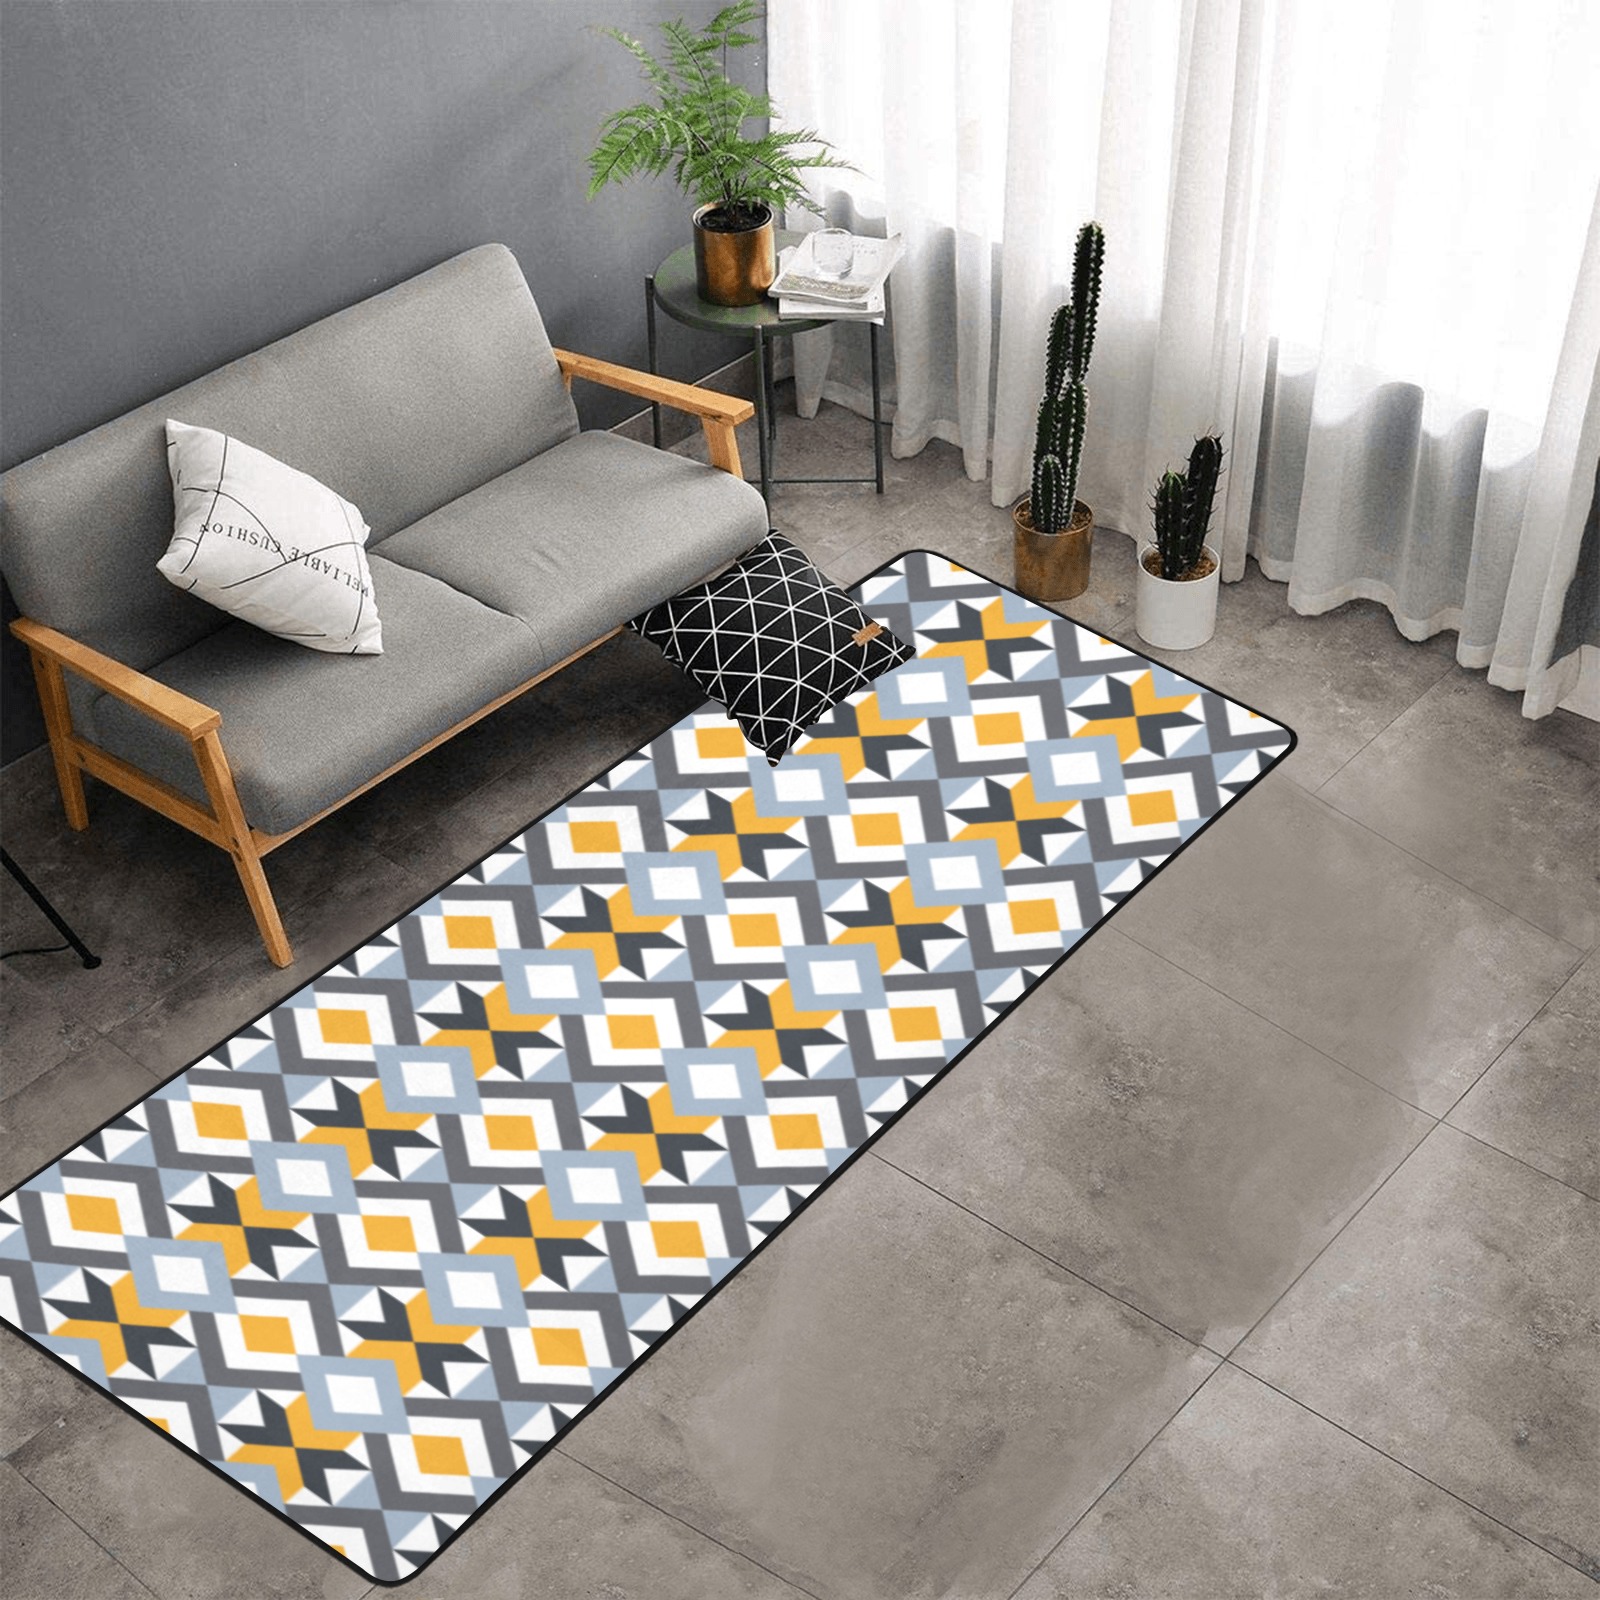 Retro Angles Abstract Geometric Pattern Area Rug with Black Binding 9'6''x3'3''